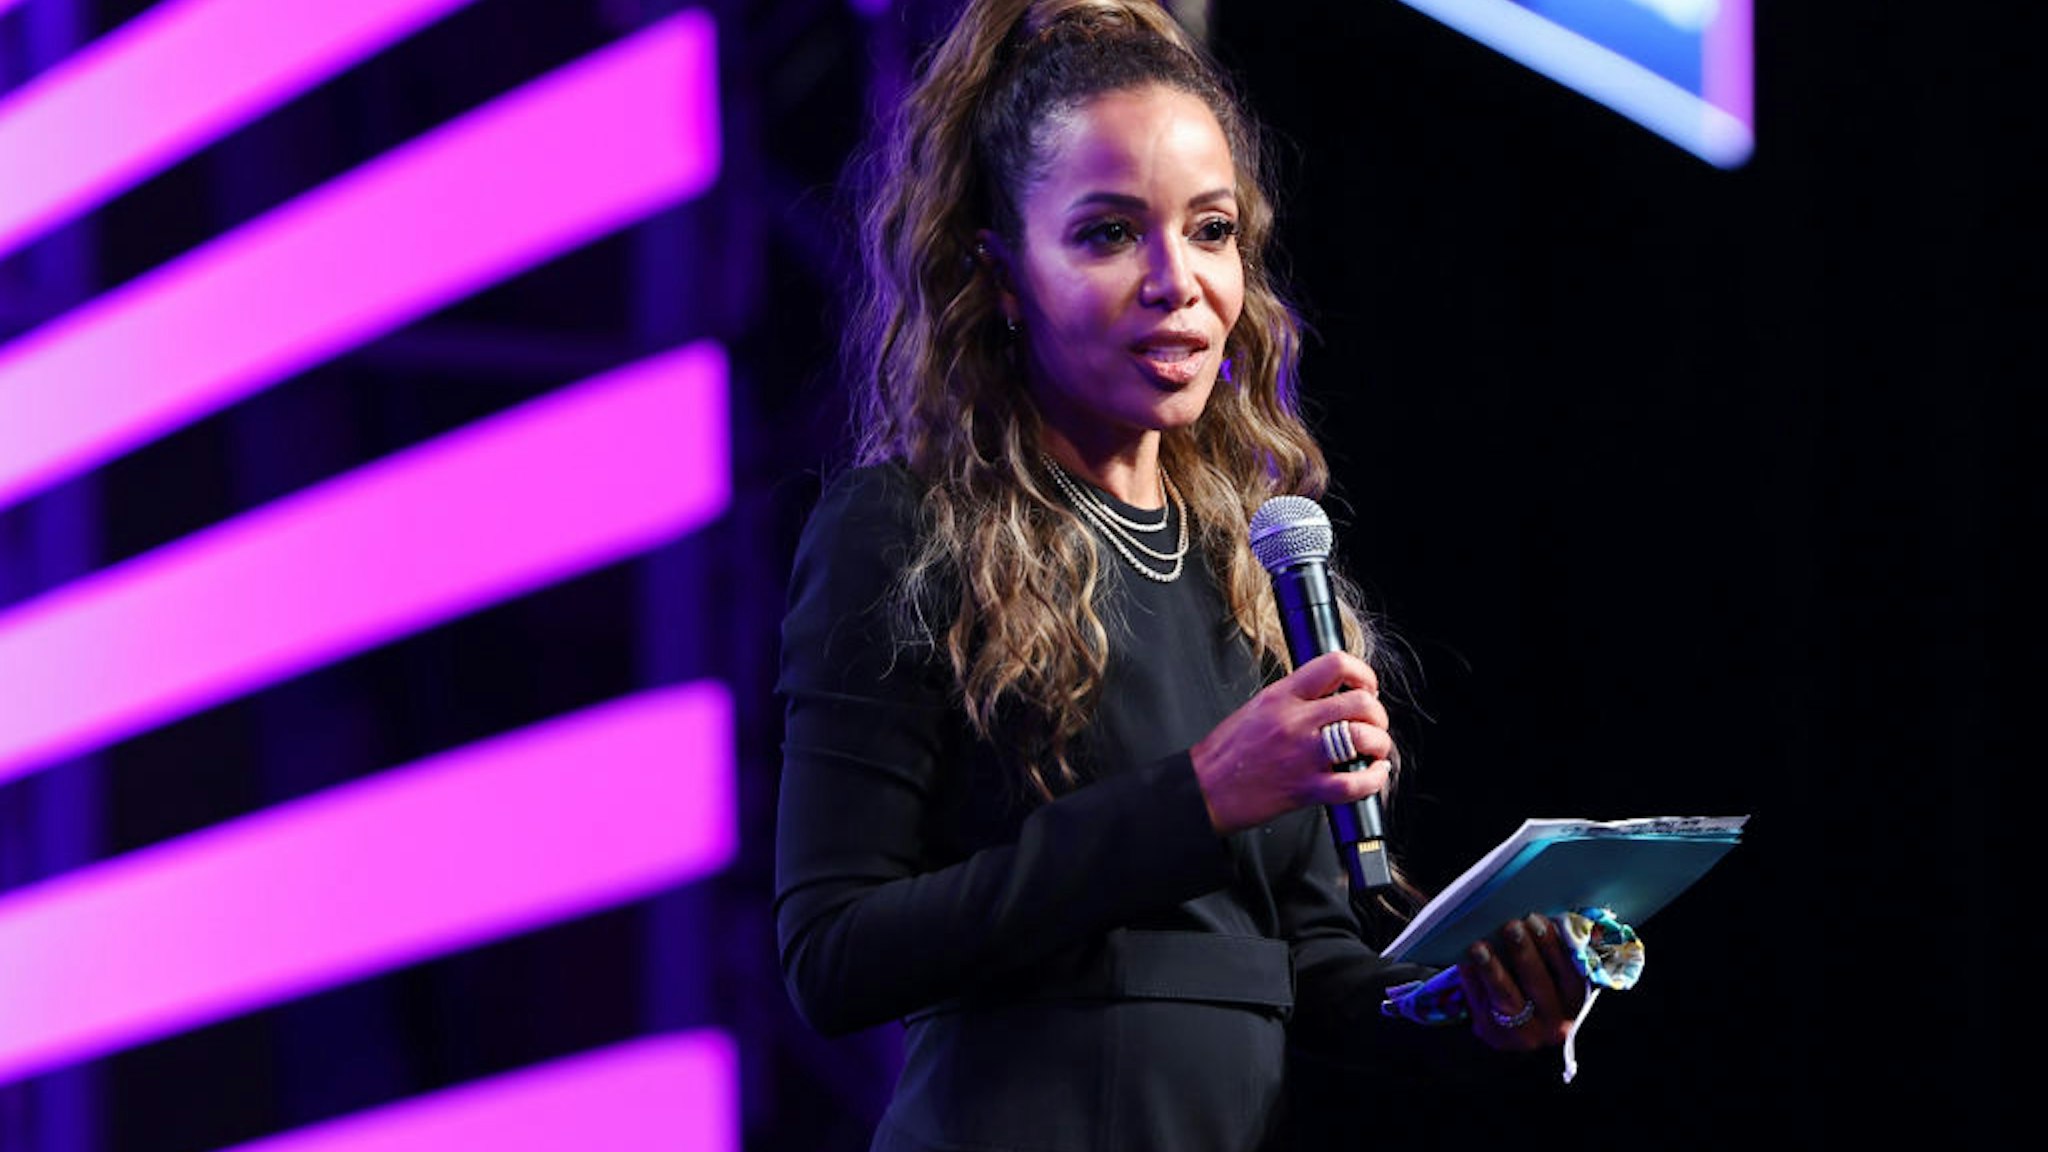 NEW ORLEANS, LOUISIANA - JUNE 30: Sunny Hostin speaks onstage at the 2023 ESSENCE Festival Of Culture™ at Ernest N. Morial Convention Center on June 30, 2023 in New Orleans, Louisiana. (Photo by Arturo Holmes/Getty Images FOR ESSENCE)